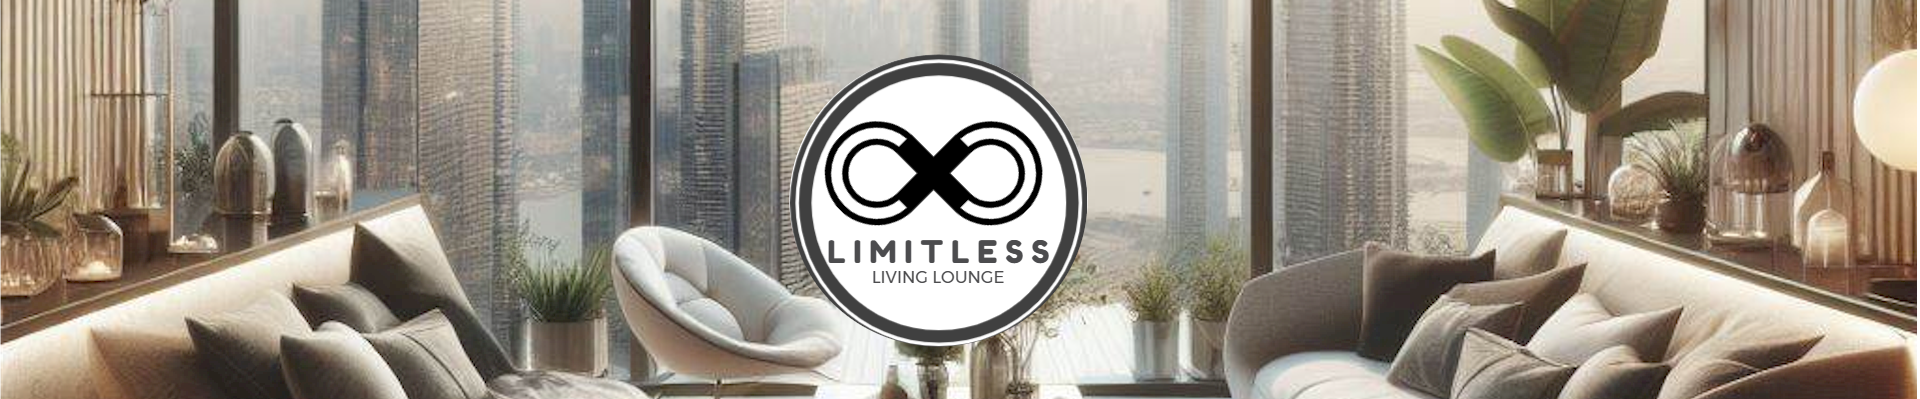 The Limitless Living Lounge